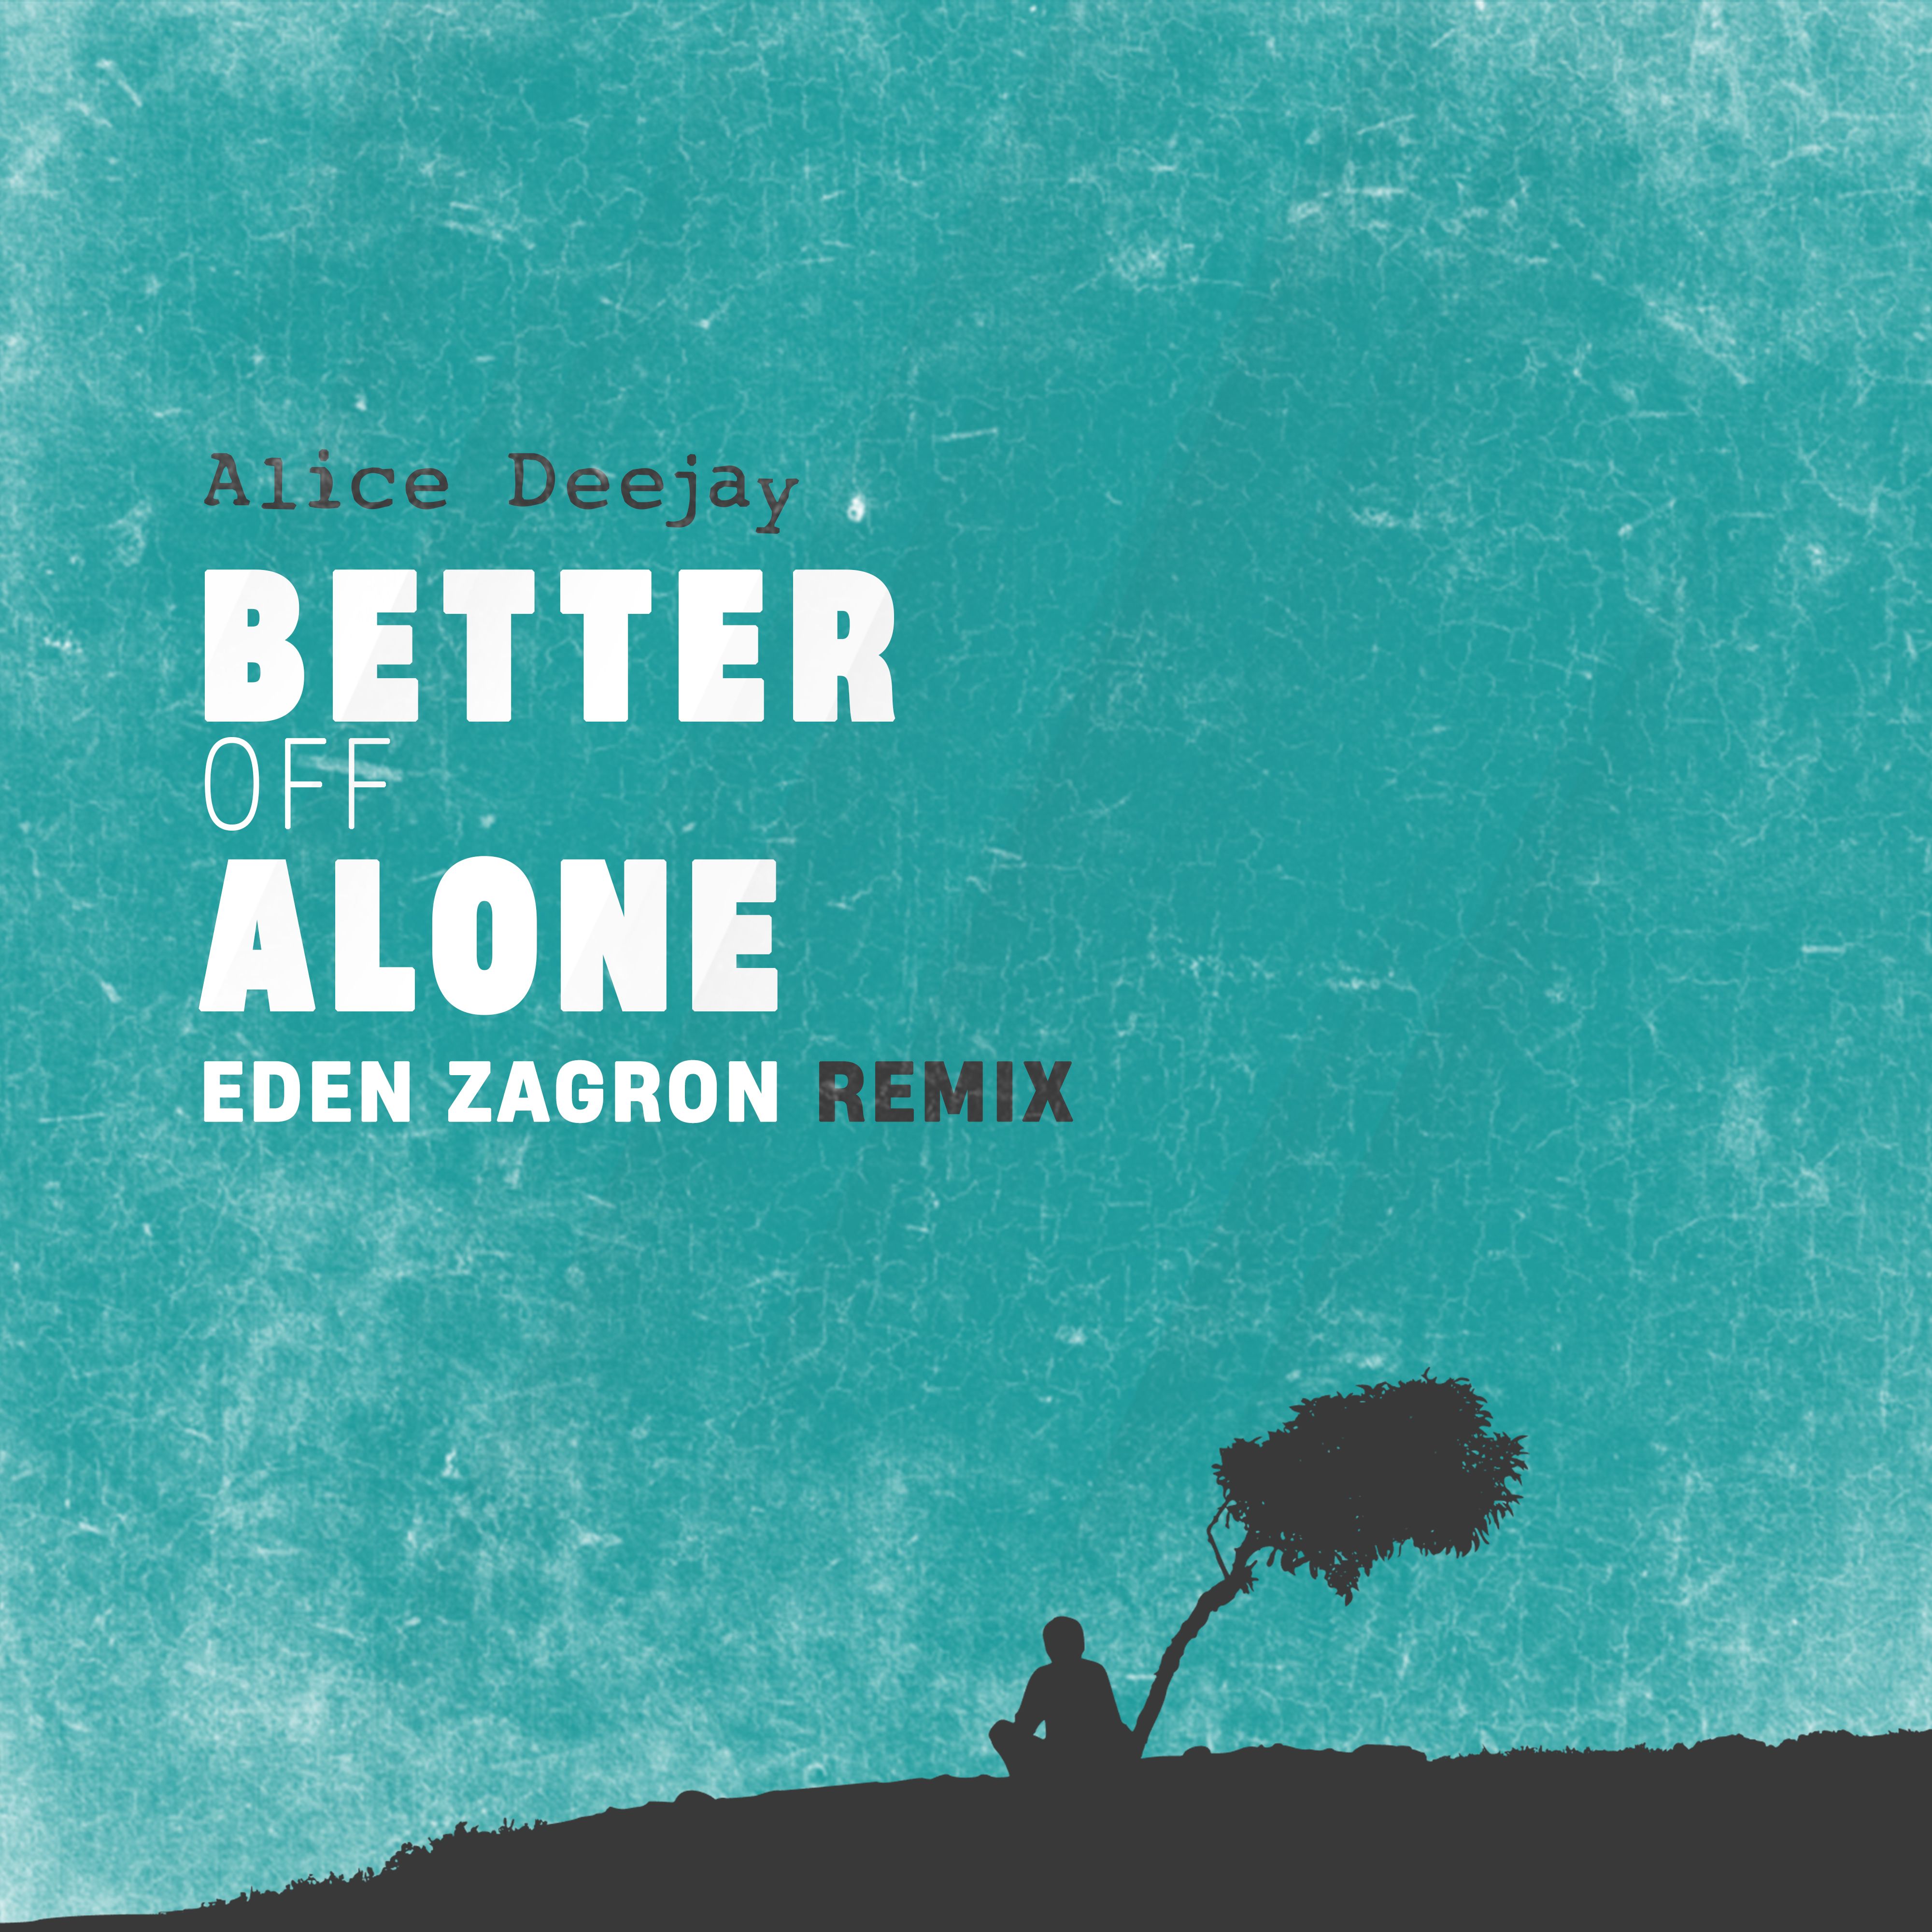 Download Alice Deejay - Better Off Alone (Eden Zagron Remix)